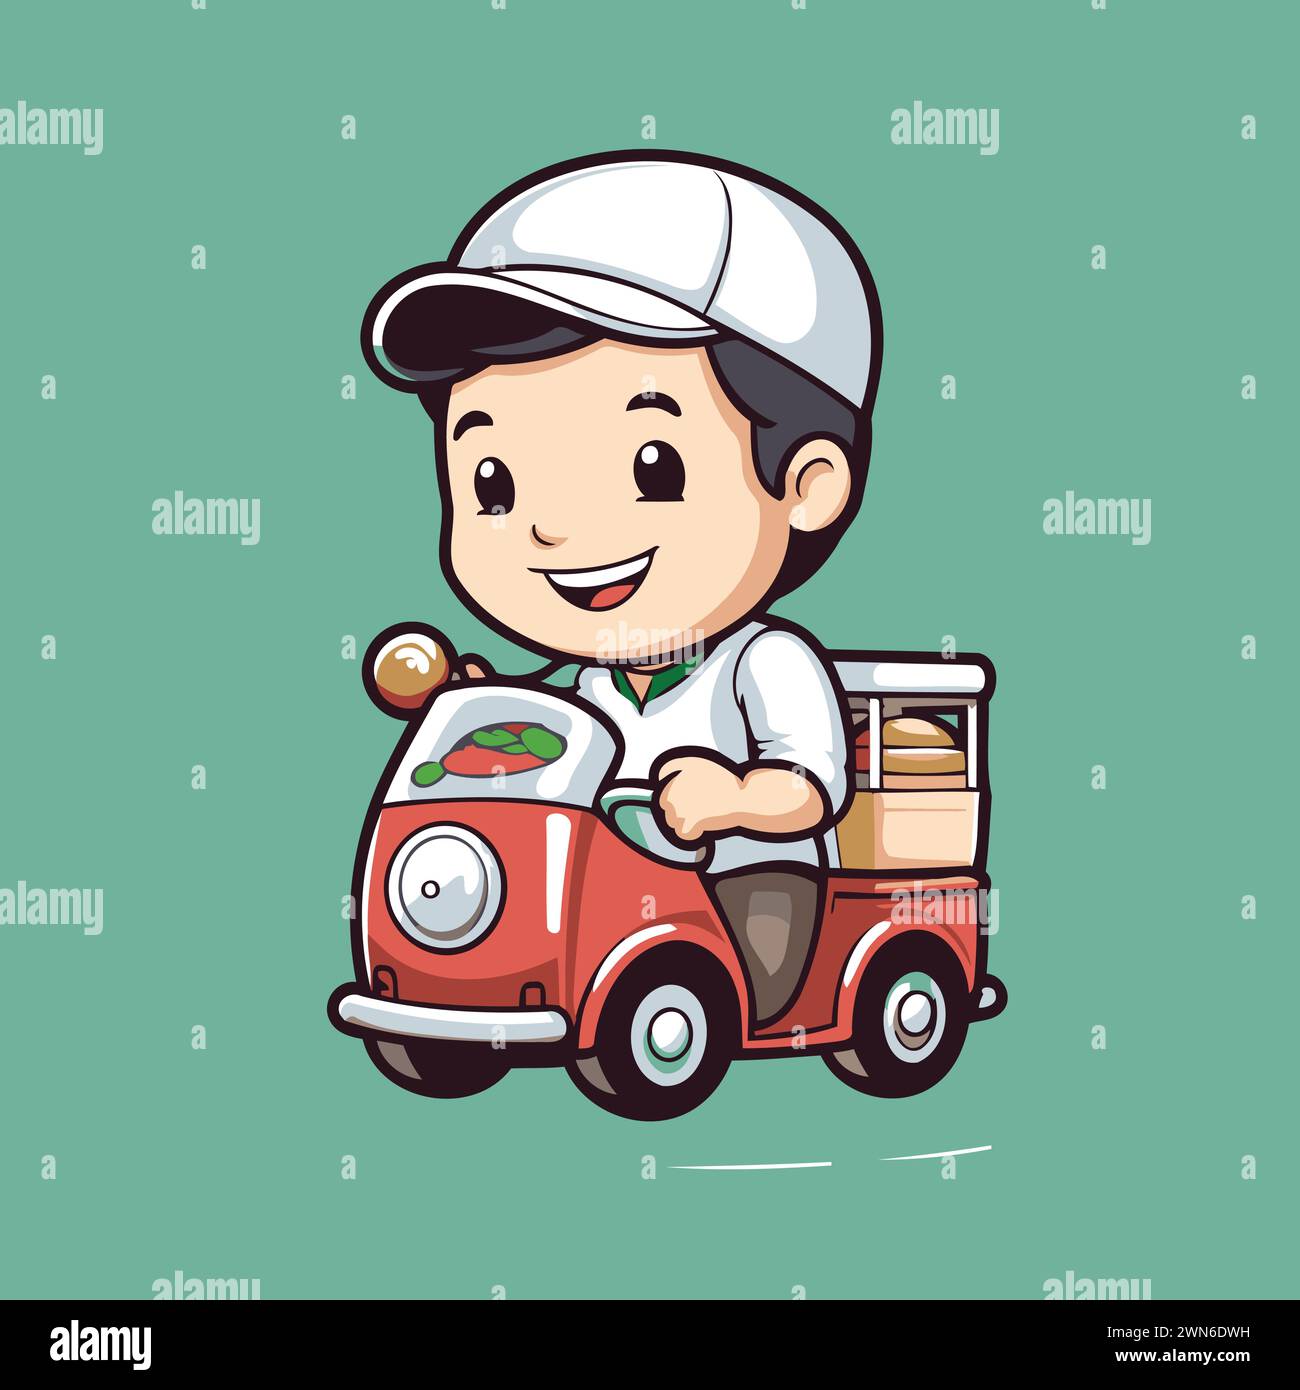 Cute cartoon delivery boy on a toy car. Vector illustration. Stock Vector